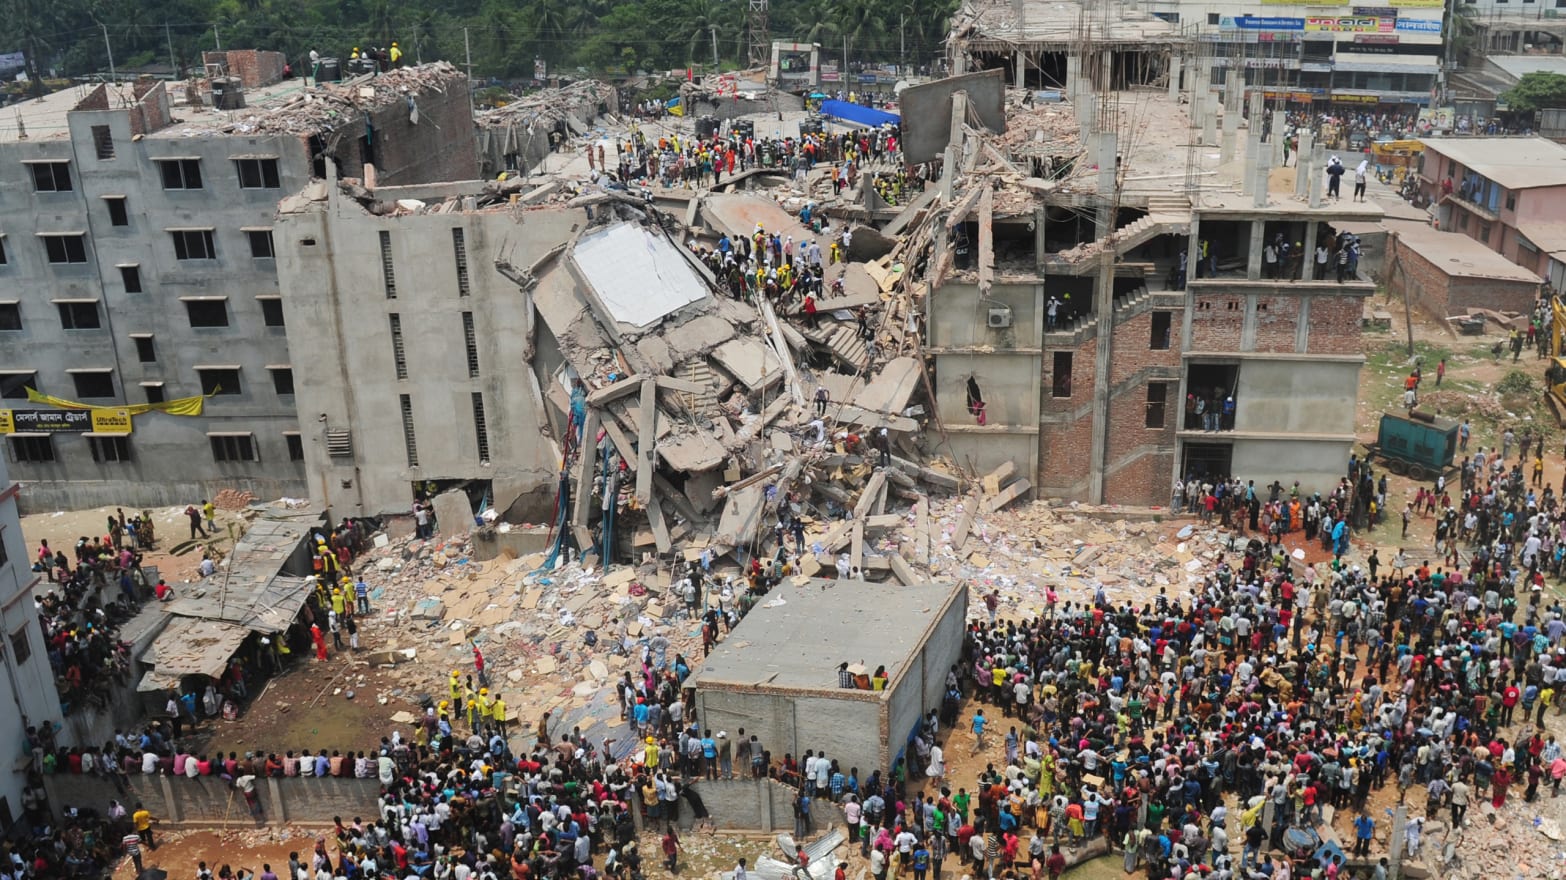 JCPenney, Mango Among Companies That Used Fatal Bangladesh Factory